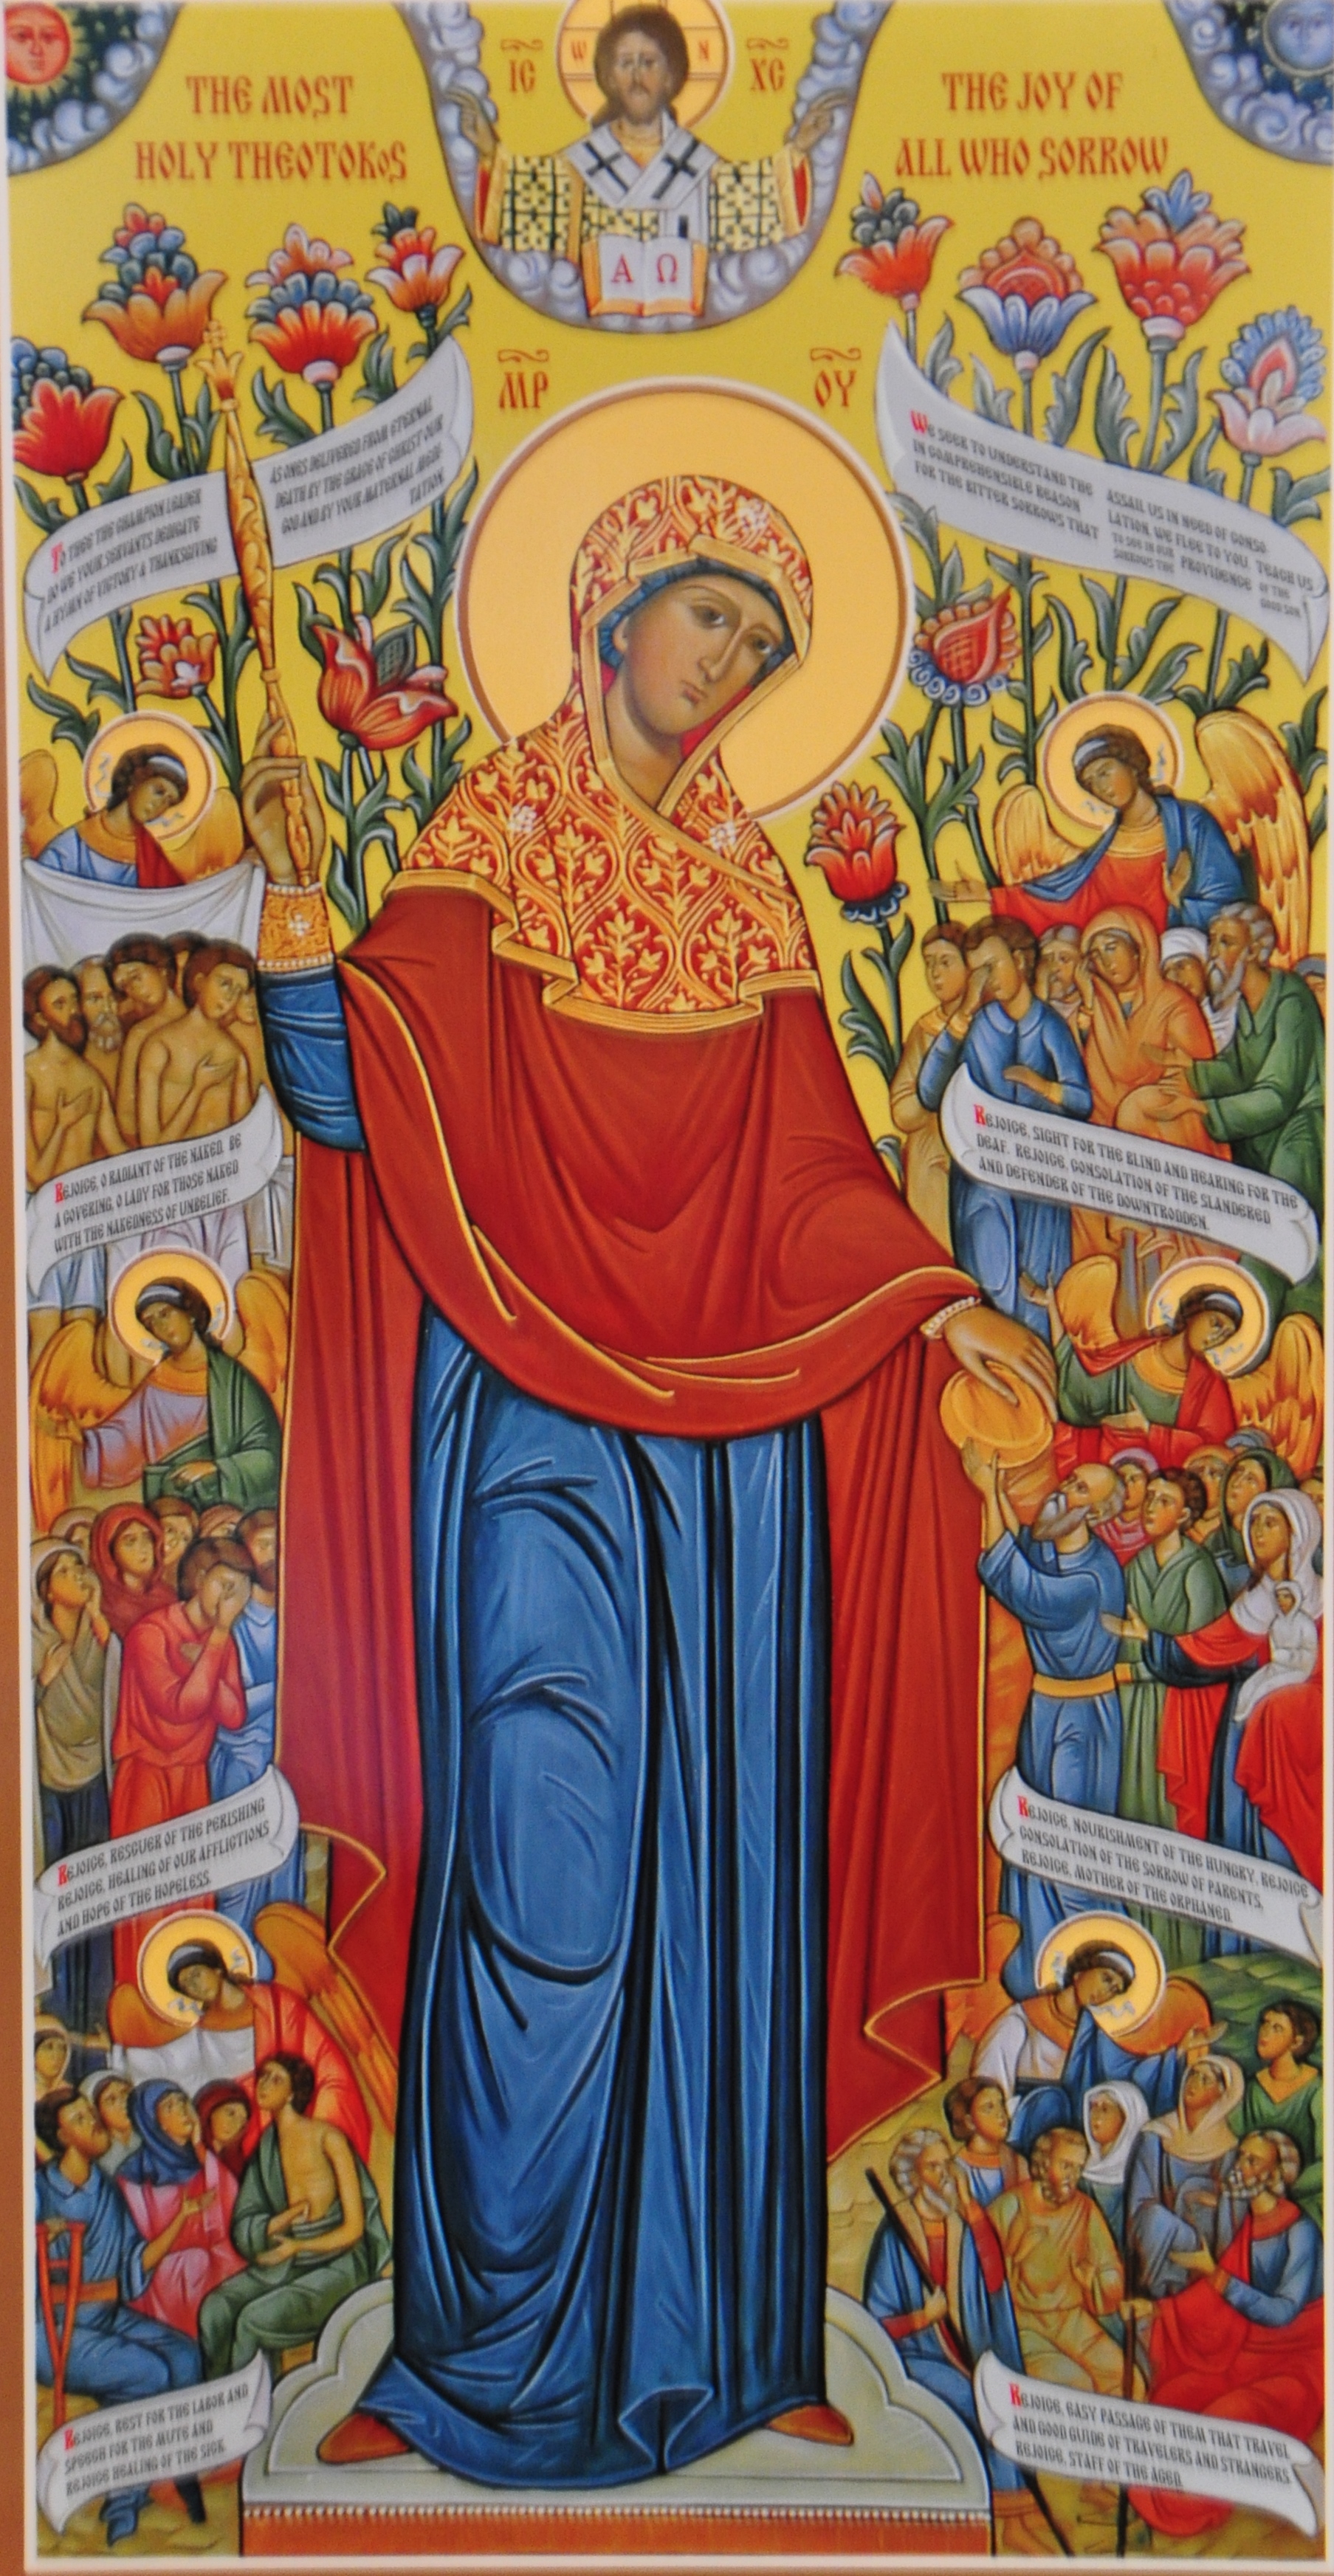 Theotokos Joy of All Who Sorrow Icon - by Ted, 28 Oct 2013 (10545663816_73d530c424_o.jpg) (CC BY-SA 2.0 [https://creativecommons.org/licenses/by-sa/2.0/]), via Flickr